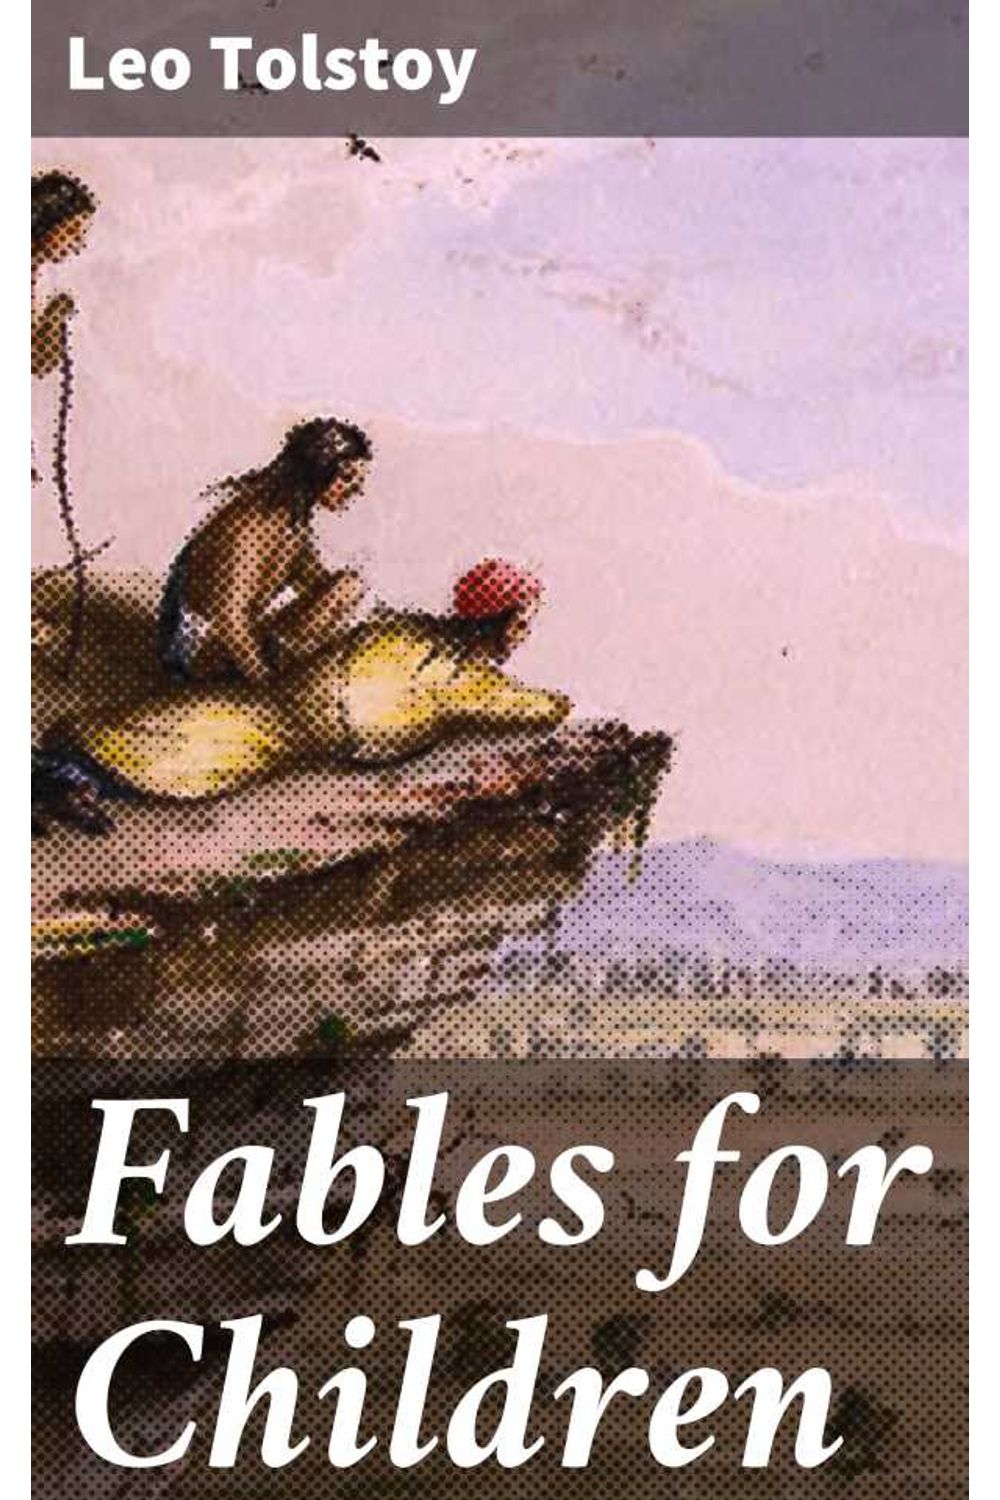 bw-fables-for-children-good-press-4064066317188